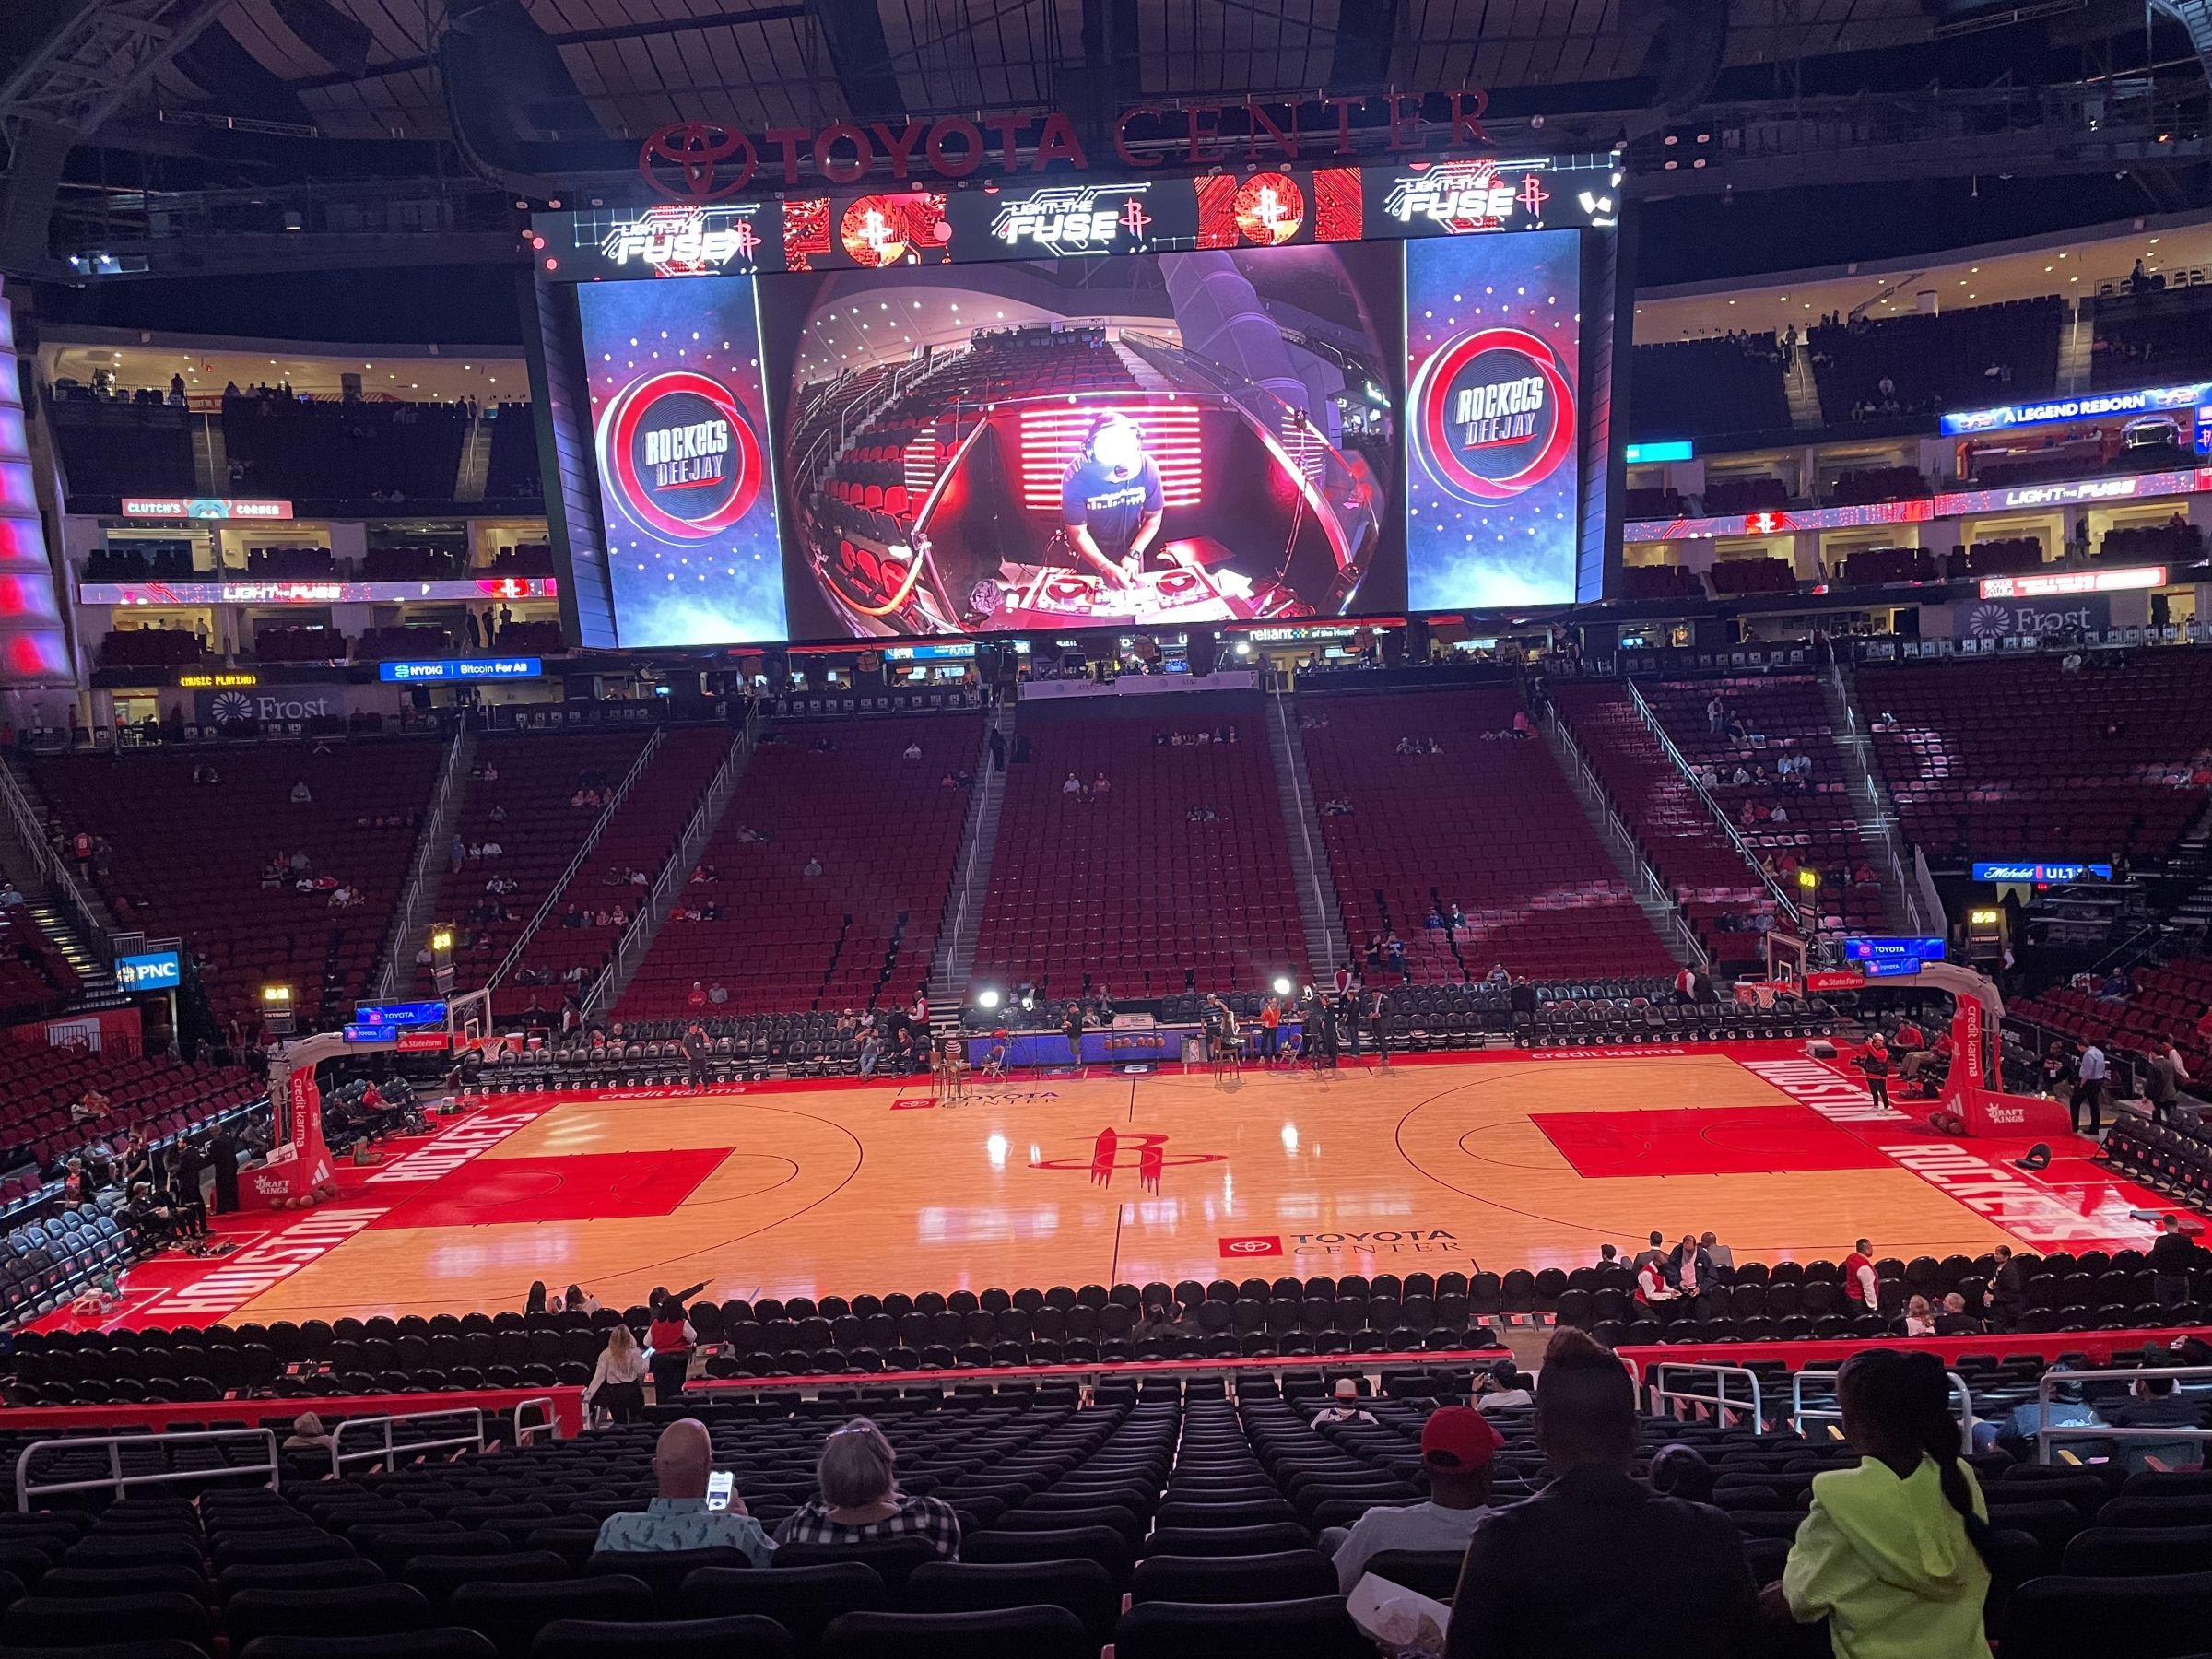 Section 107 At Toyota Center Rateyourseats Com